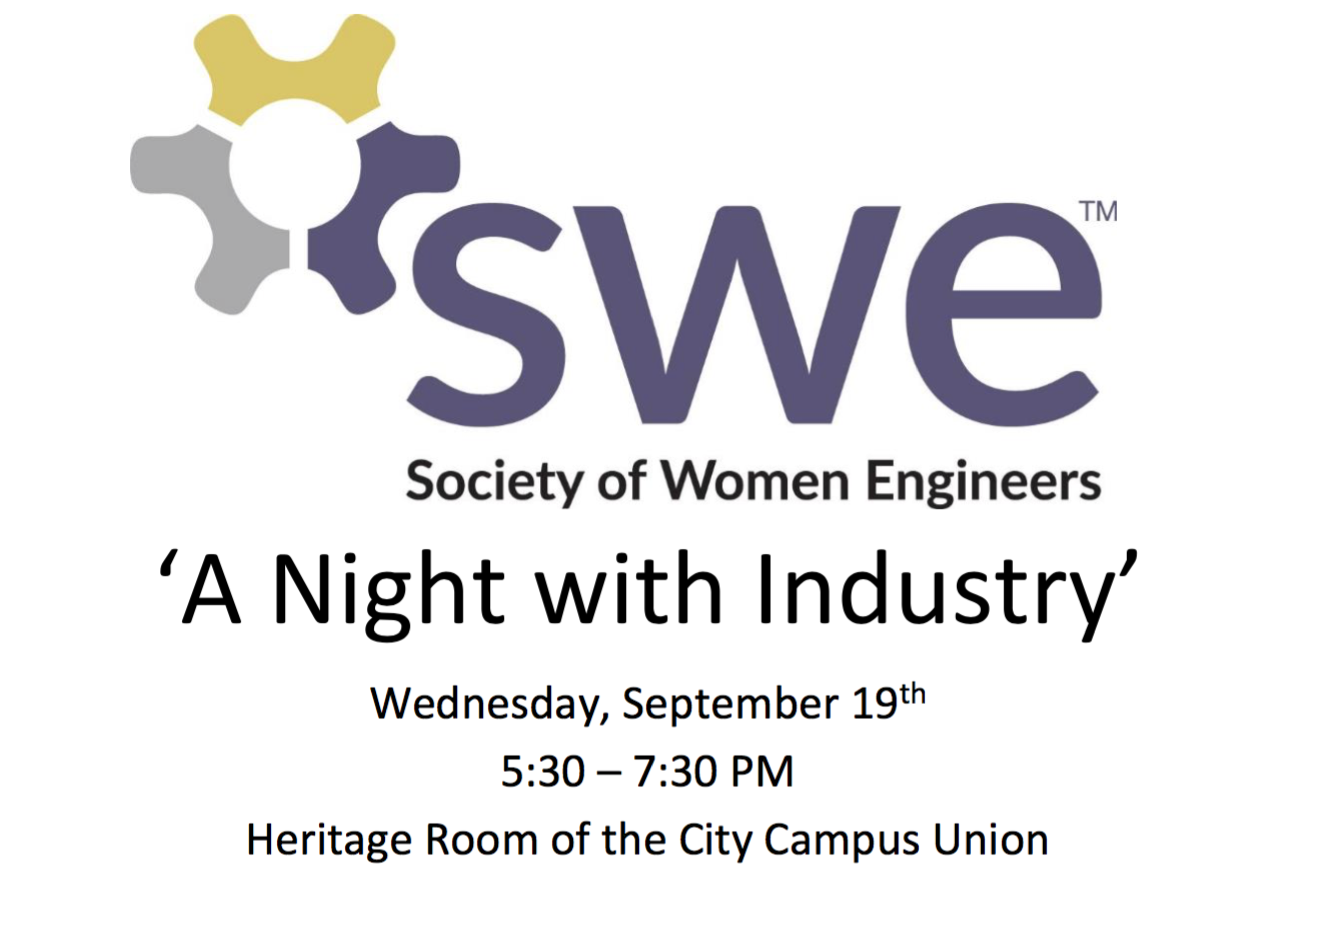 "A Night with Industry" hosted by the Society of Women Engineers.